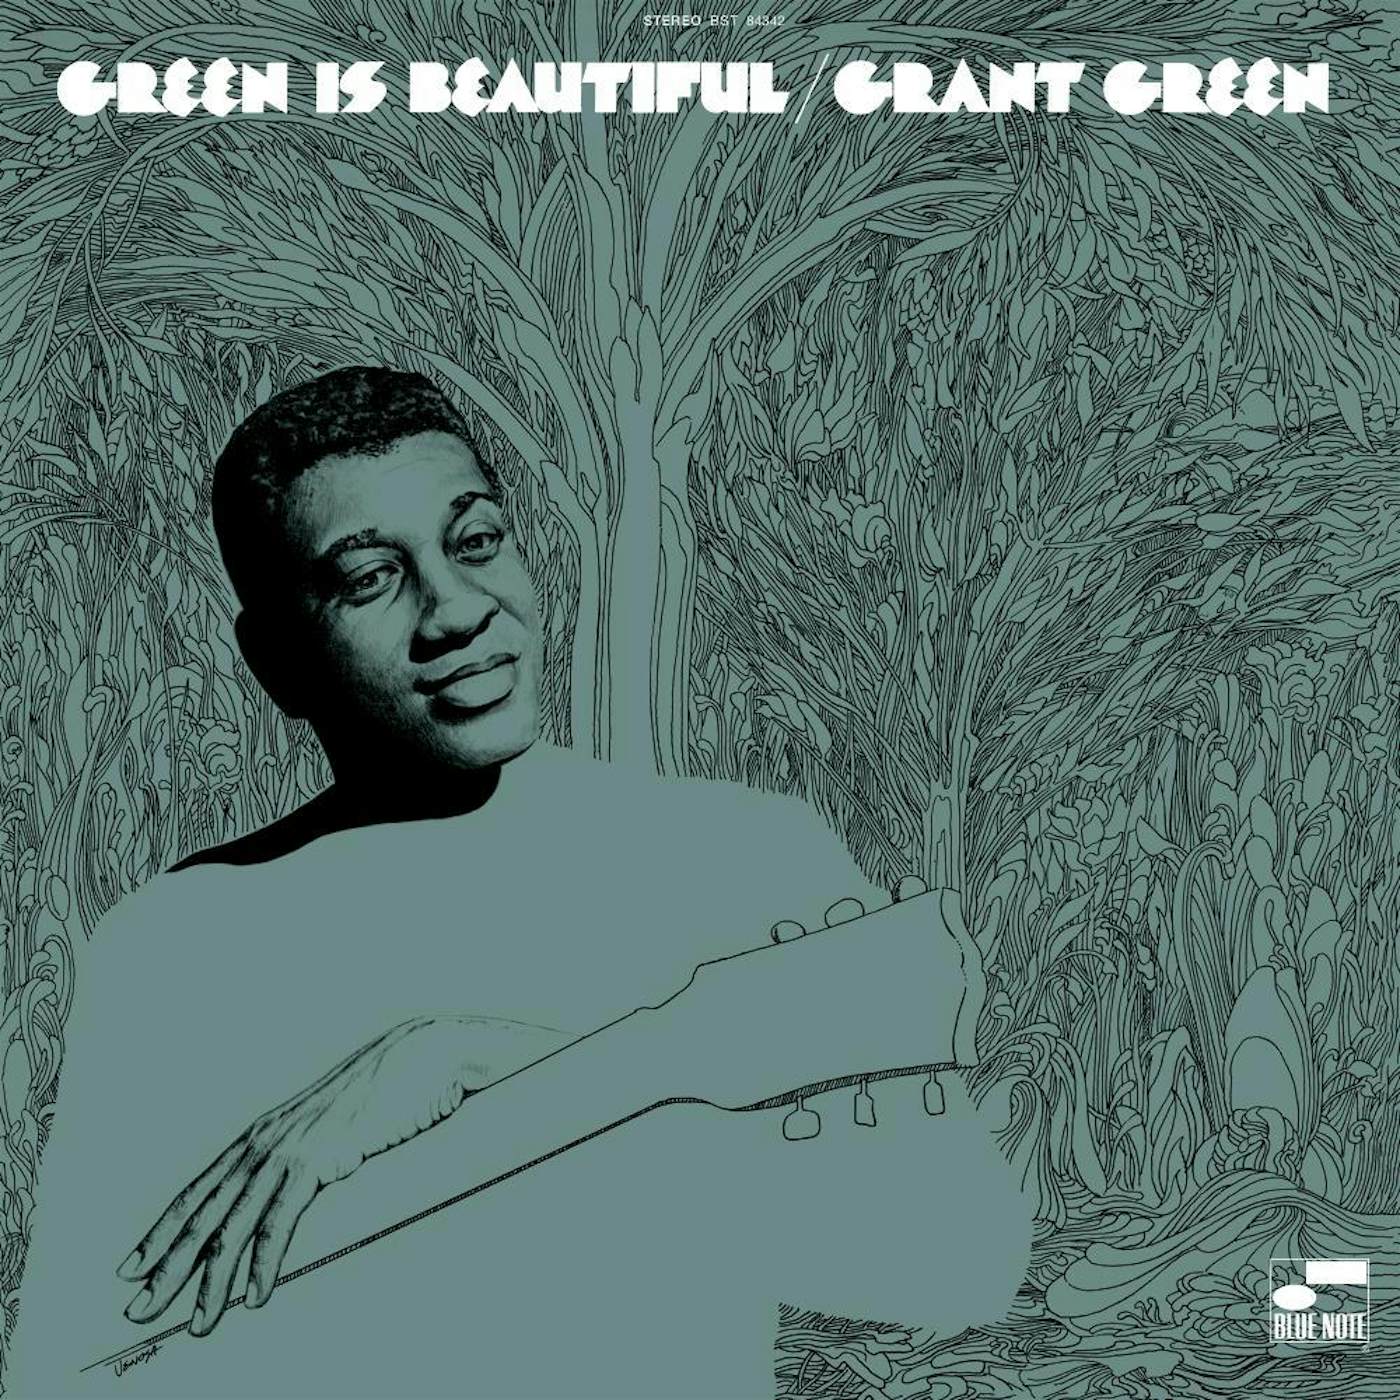 Grant Green GREEN IS BEAUTIFUL (BLUE NOTE CLASSIC VNYL SERIES) Vinyl Record